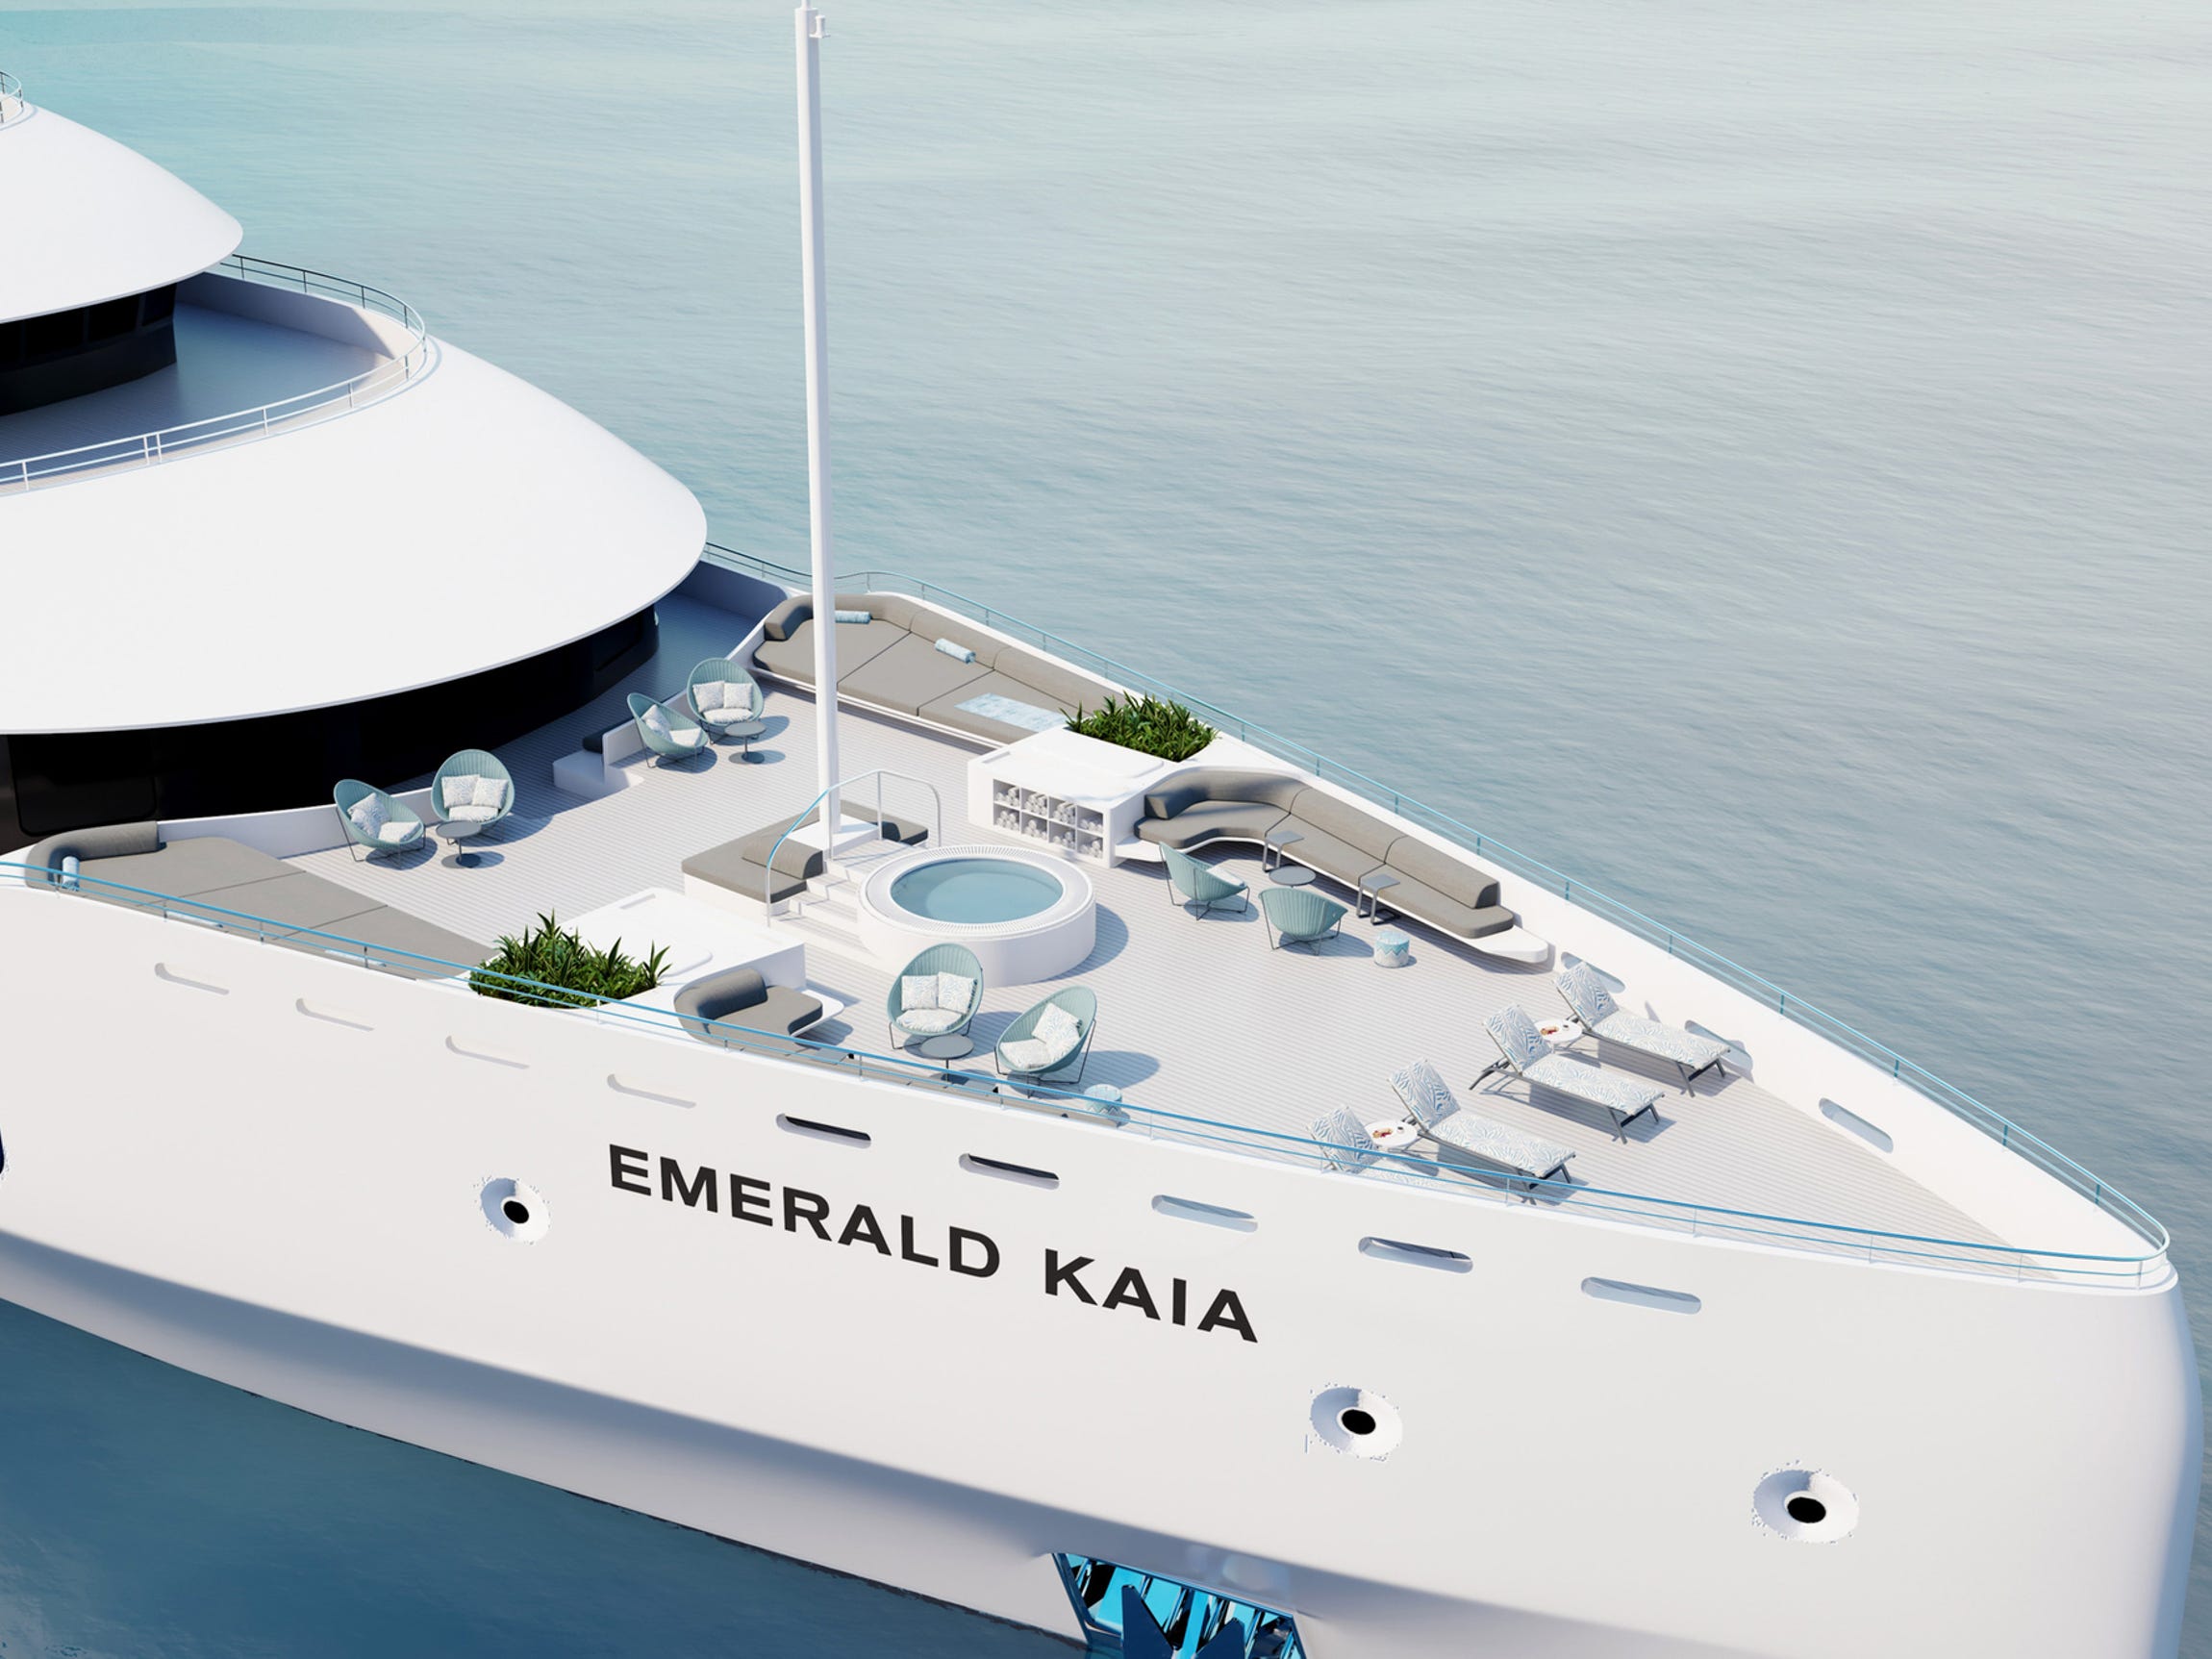 <p>The 64-cabin Emerald Kaia would have a larger guest capacity than its two predecessors but would still be tiny compared to most cruise ships, including some of the most luxurious ones.</p><p><a href="https://www.businessinsider.com/new-luxury-cruise-ship-wealthy-travelers-regent-seven-seas-grandeur-2023-12">Regent Seven Seas' new Grandeur</a> can accommodate 746 guests, while <a href="https://www.businessinsider.com/ritz-carlton-second-luxury-cruise-ship-ilma-yacht-2023-3">Ritz-Carlton says its next ship</a> will sail up to 448 travelers.</p><p>Even <a href="https://www.businessinsider.com/four-seasons-new-ultra-luxury-yacht-cruise-line-2024-4">Four Season's upcoming vessel</a> — with fares up to $350,000 a week — would have a larger guest capacity of up to 222 people. However, it would be almost 290 feet longer than Emerald Kaia.</p>